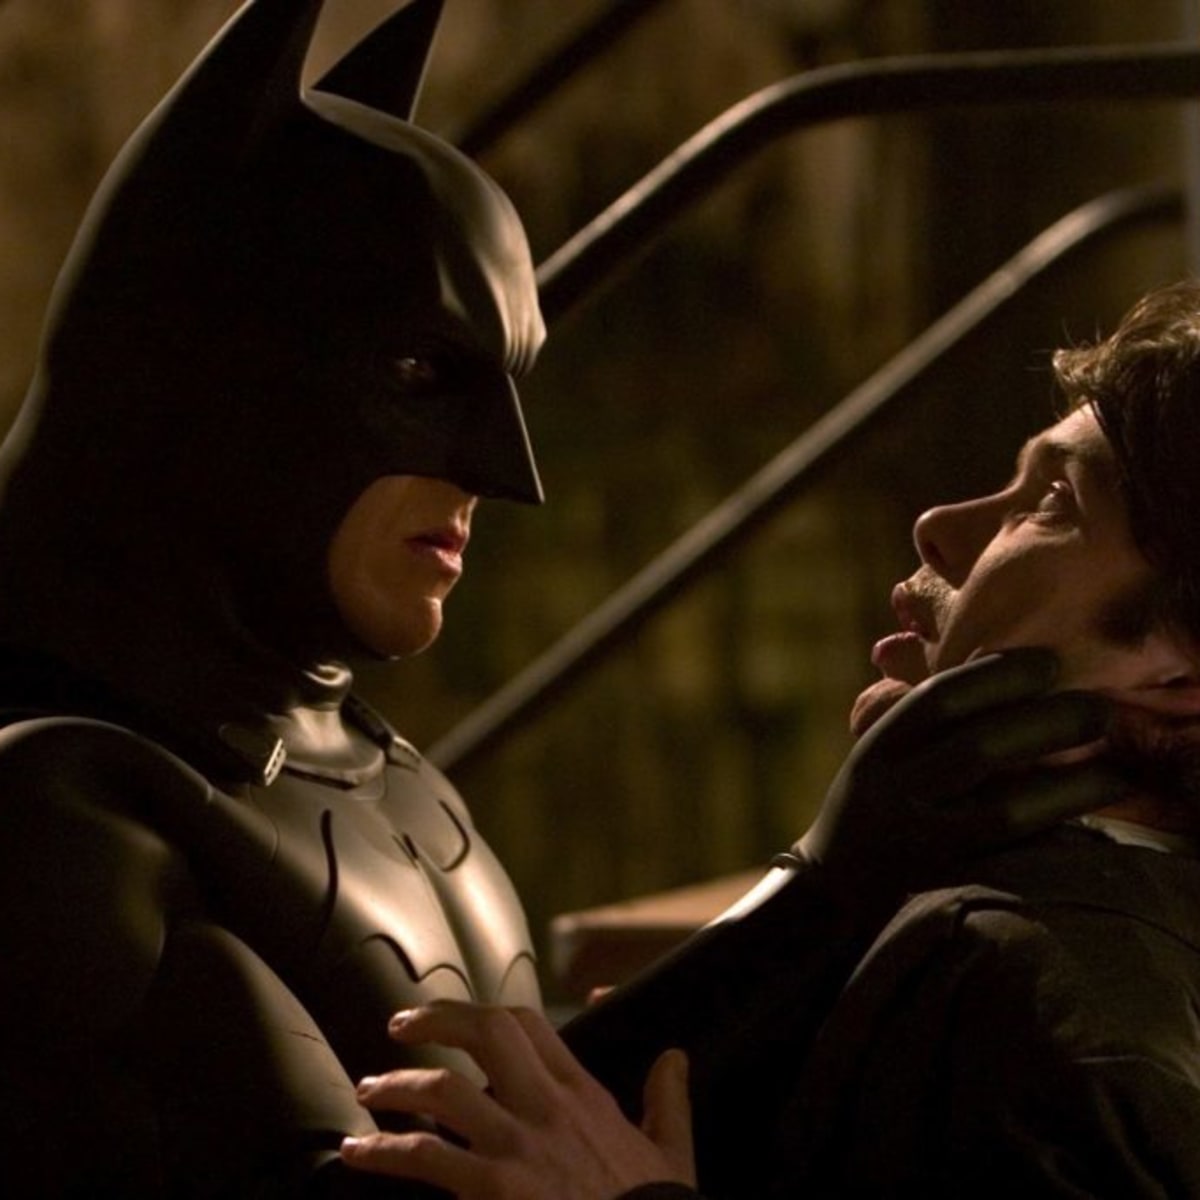 Writers on Writing: Revitalizing the Batman Franchise with Batman Begins -  Writer's Digest